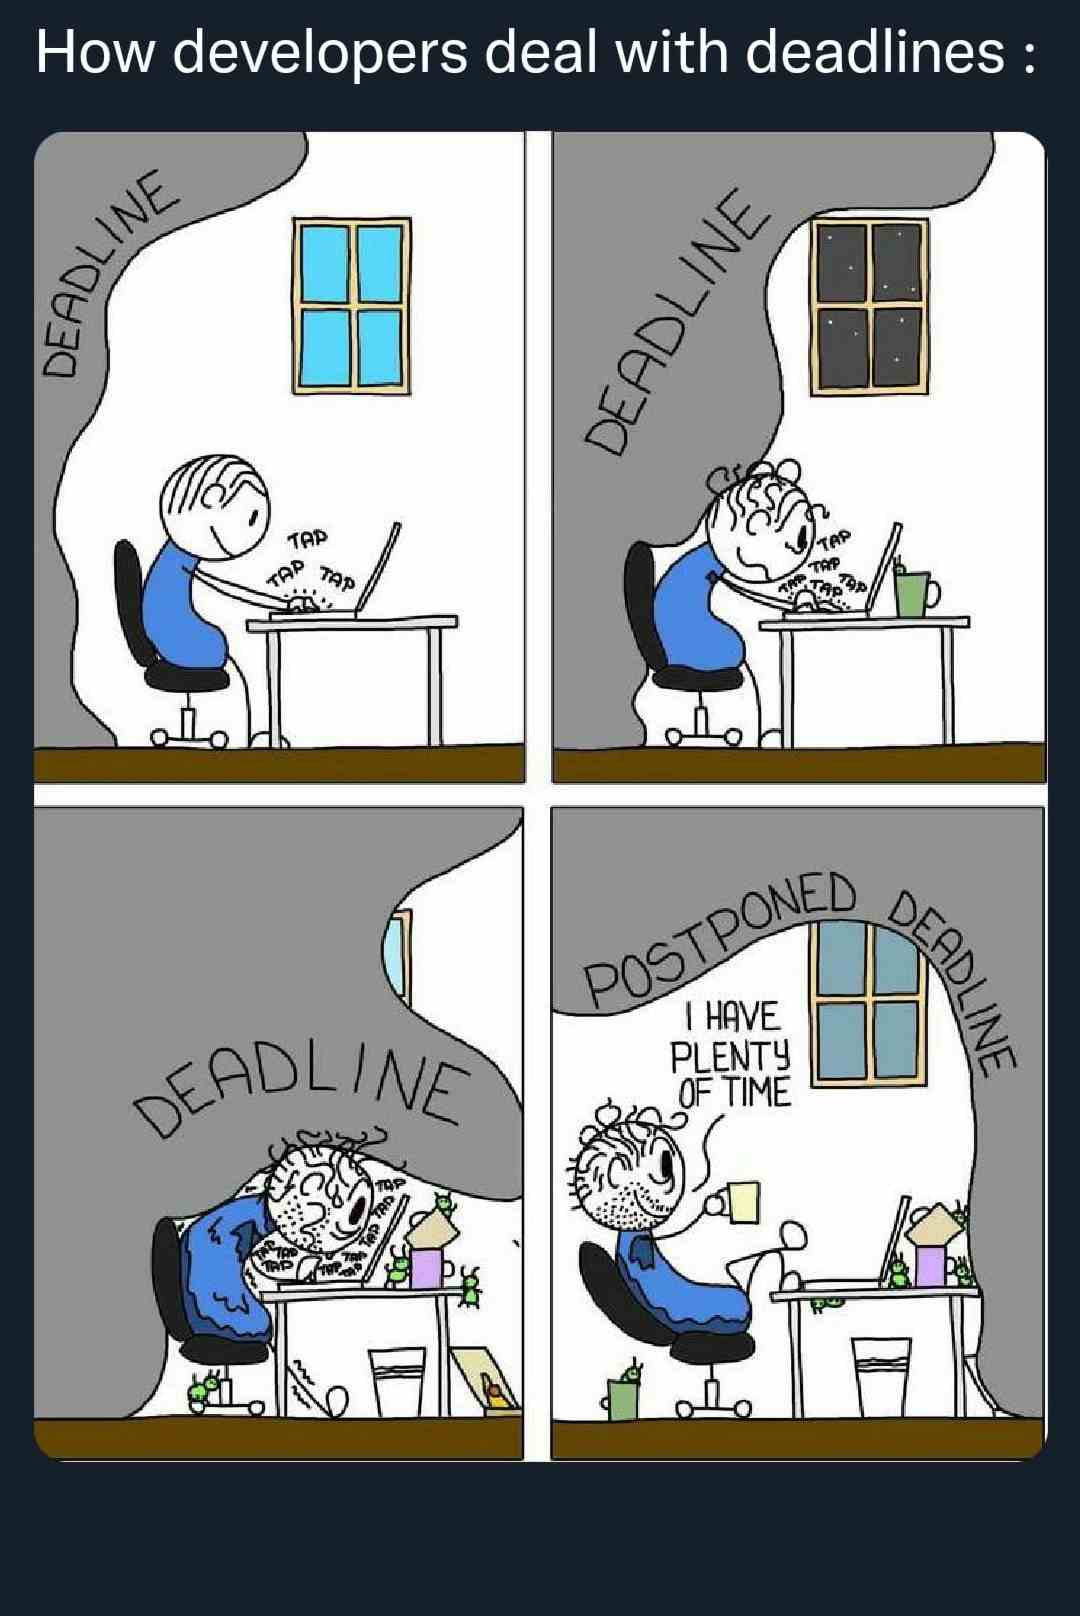 How developers deal with deadlines